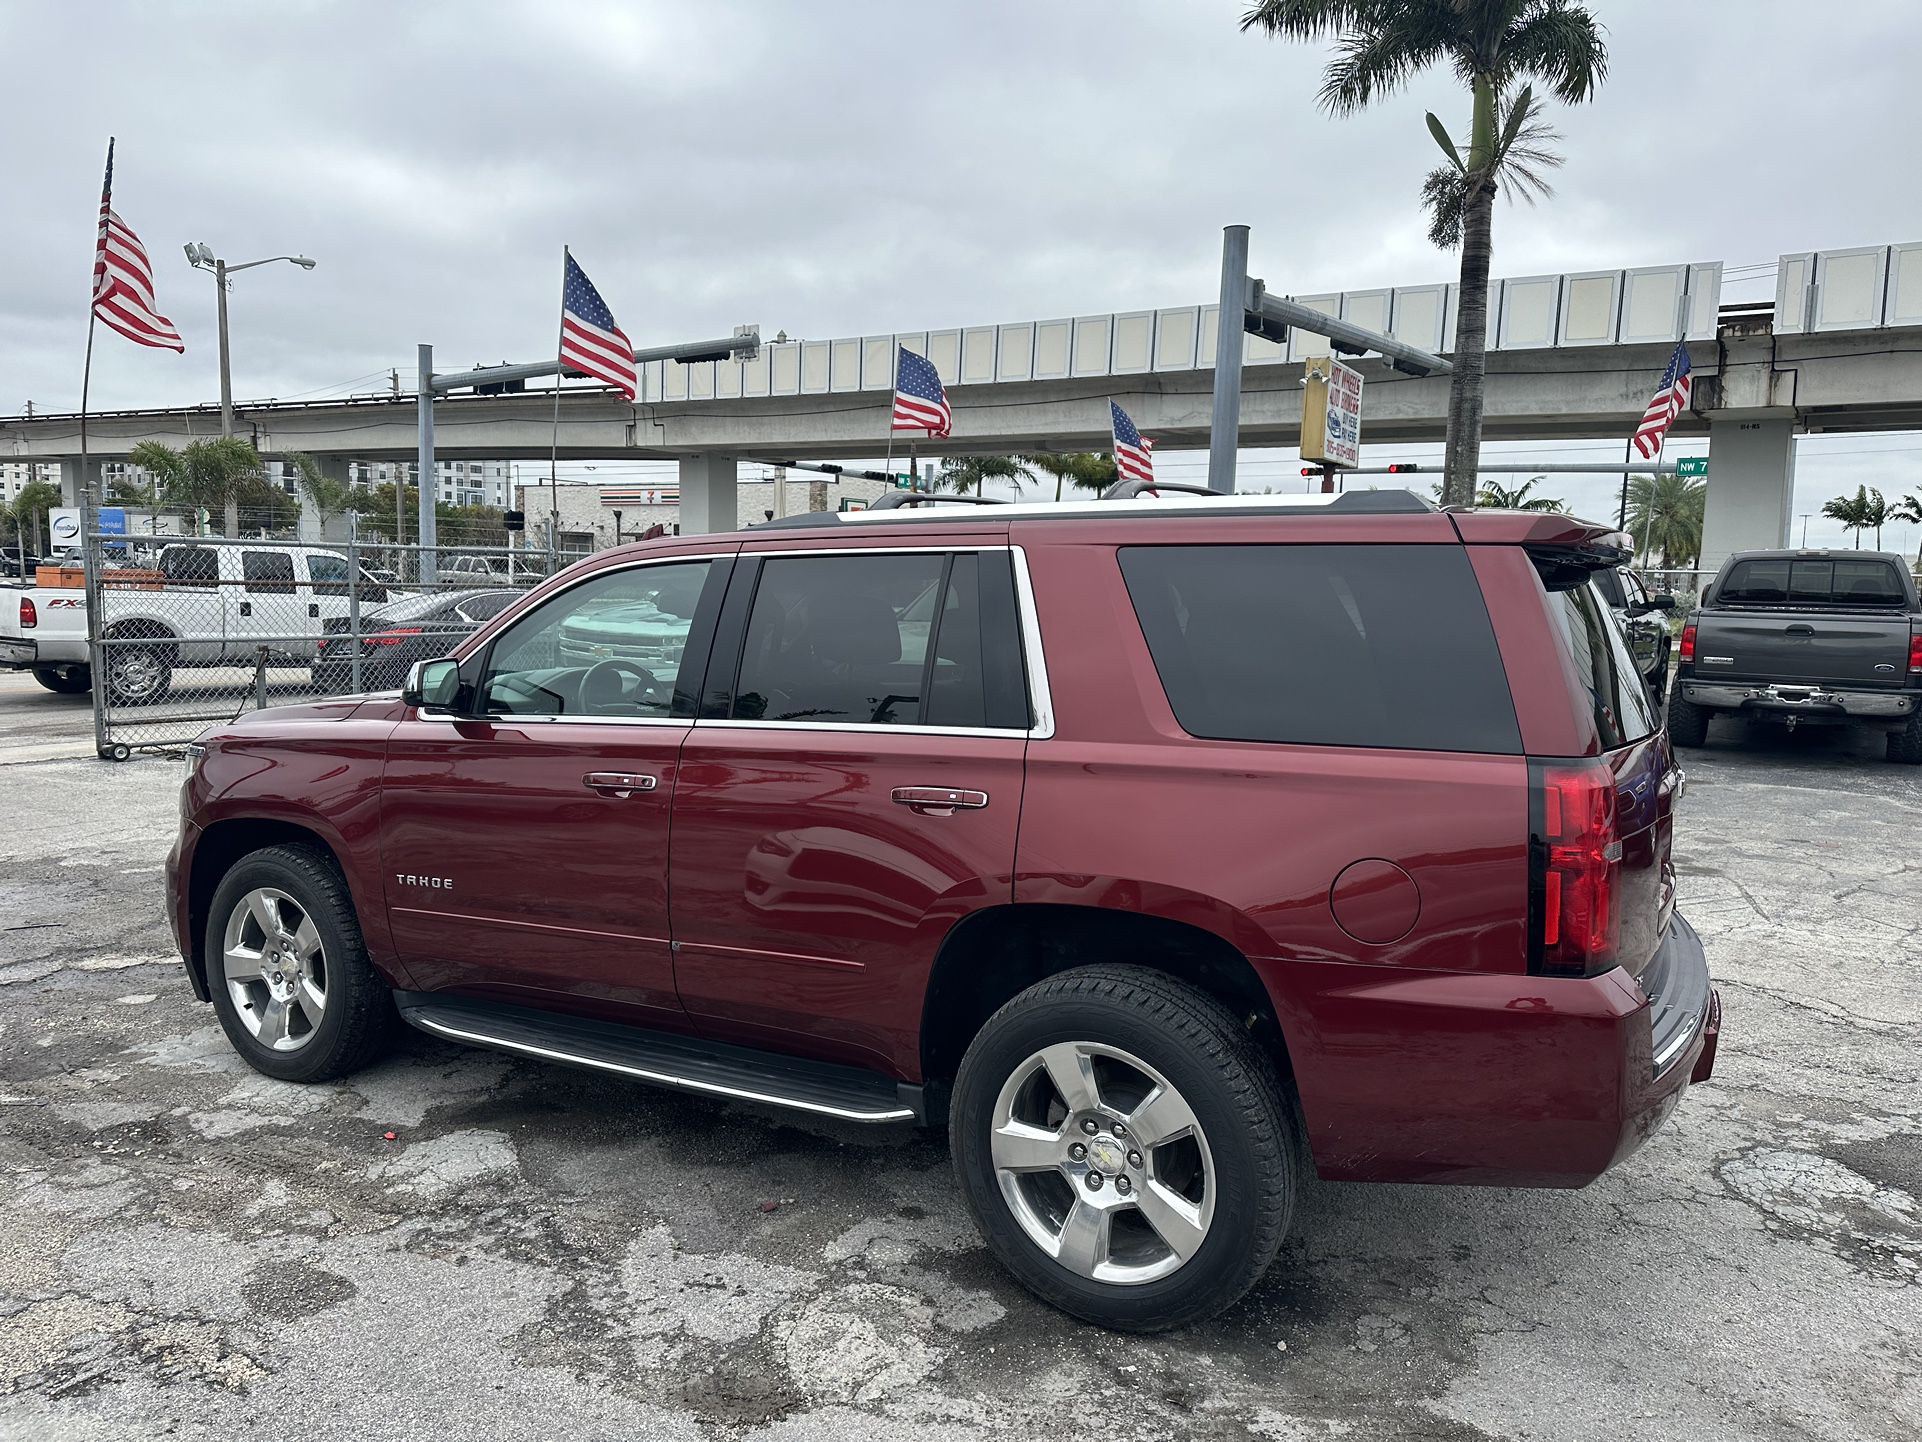 used 2017 Chevy Tahoe - back view